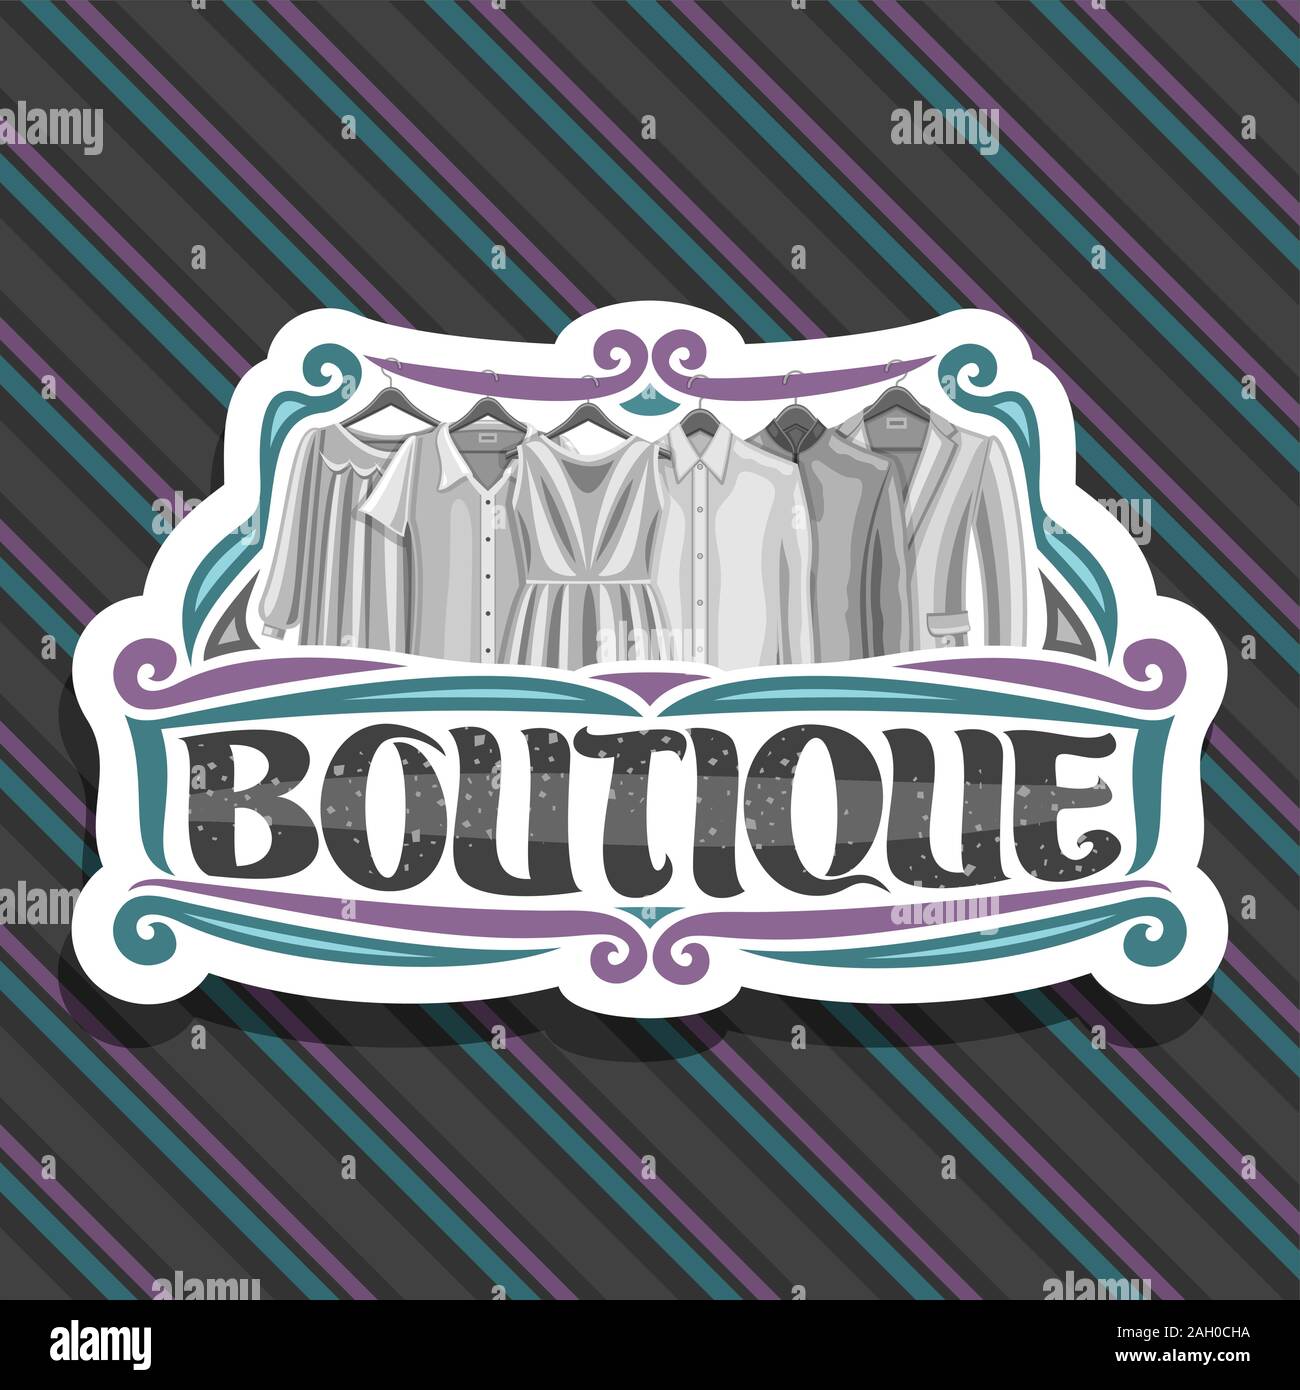 Vector logo for Boutique, cut paper sign board with illustration of women's dresses and men's jackets, original brush lettering for word boutique, fas Stock Vector